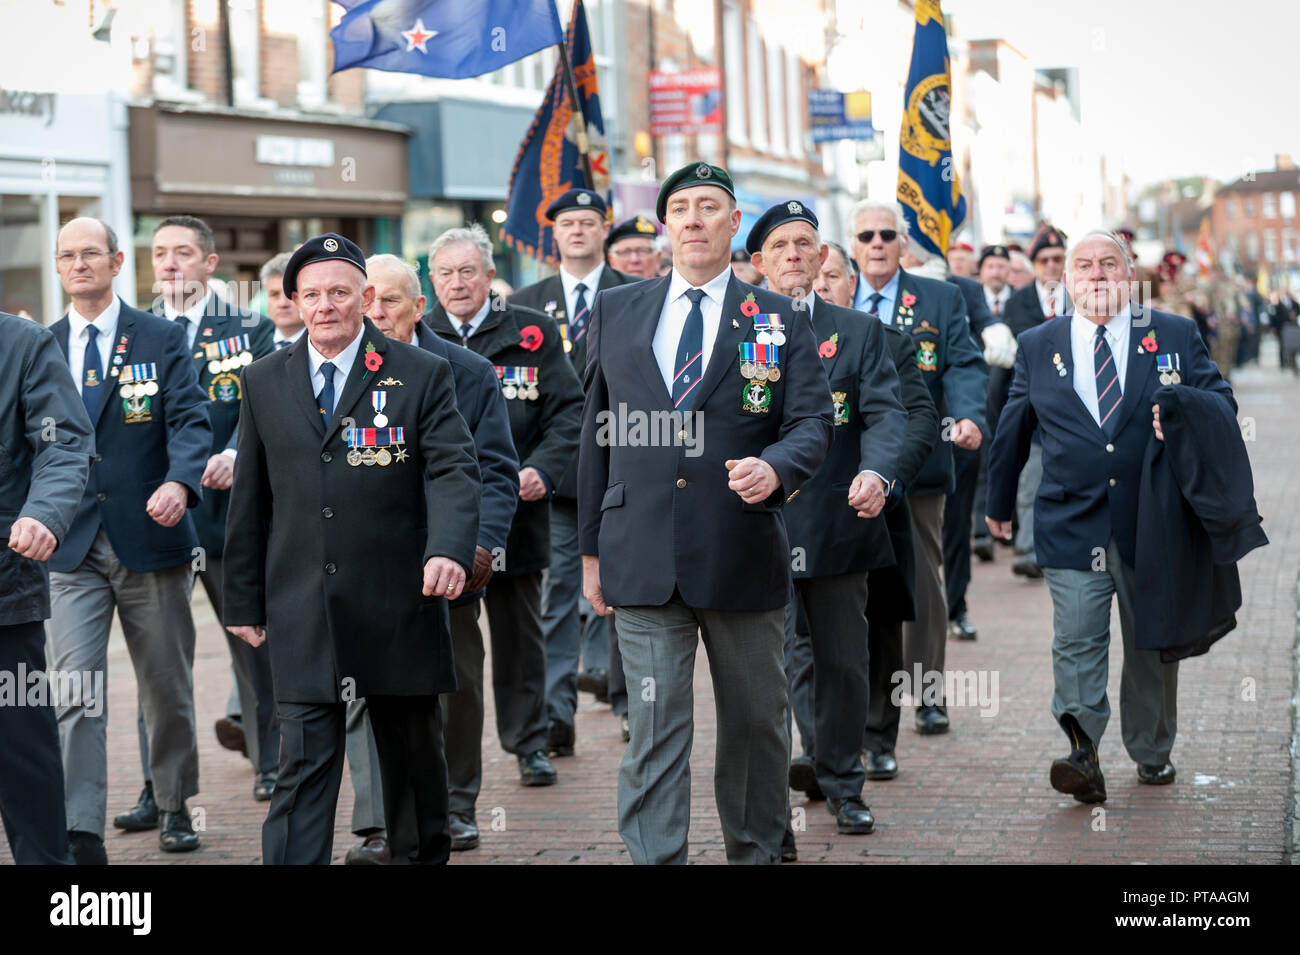 Remembrance Sunday parade, veterans carrying standards march through the city of Chichester, West Sussex, UK. Stock Photo